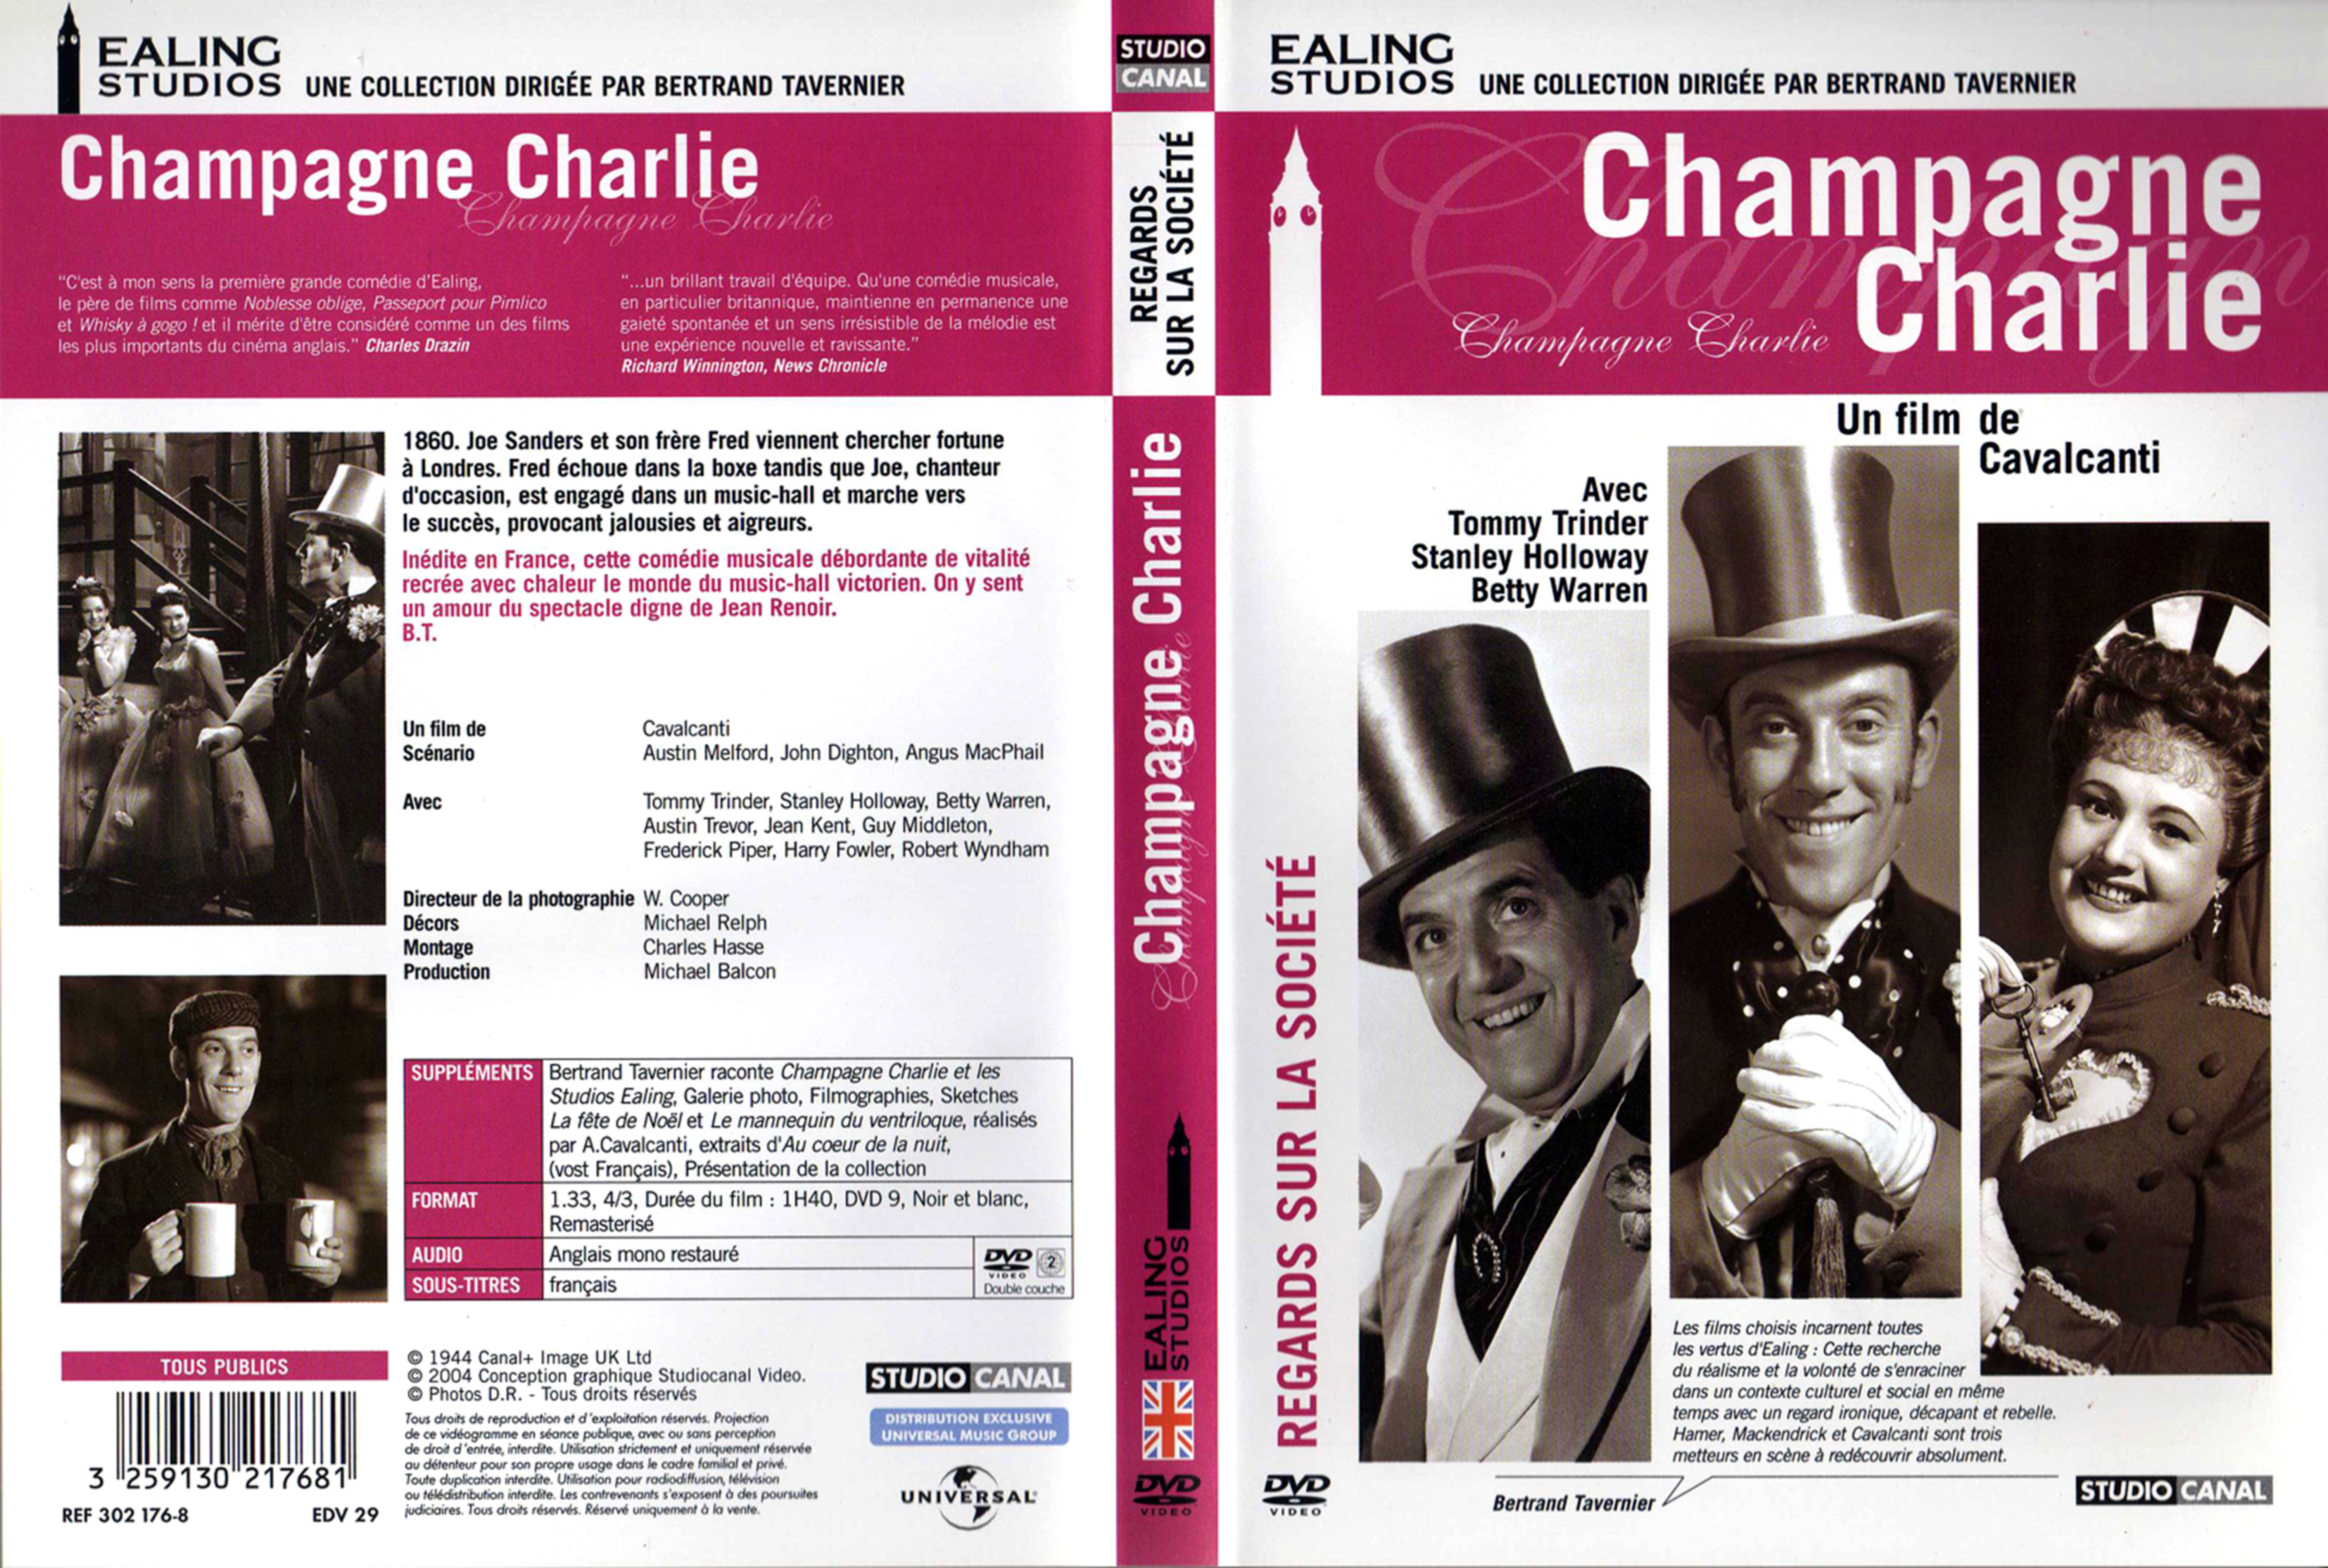 Jaquette DVD Champagne Charlie